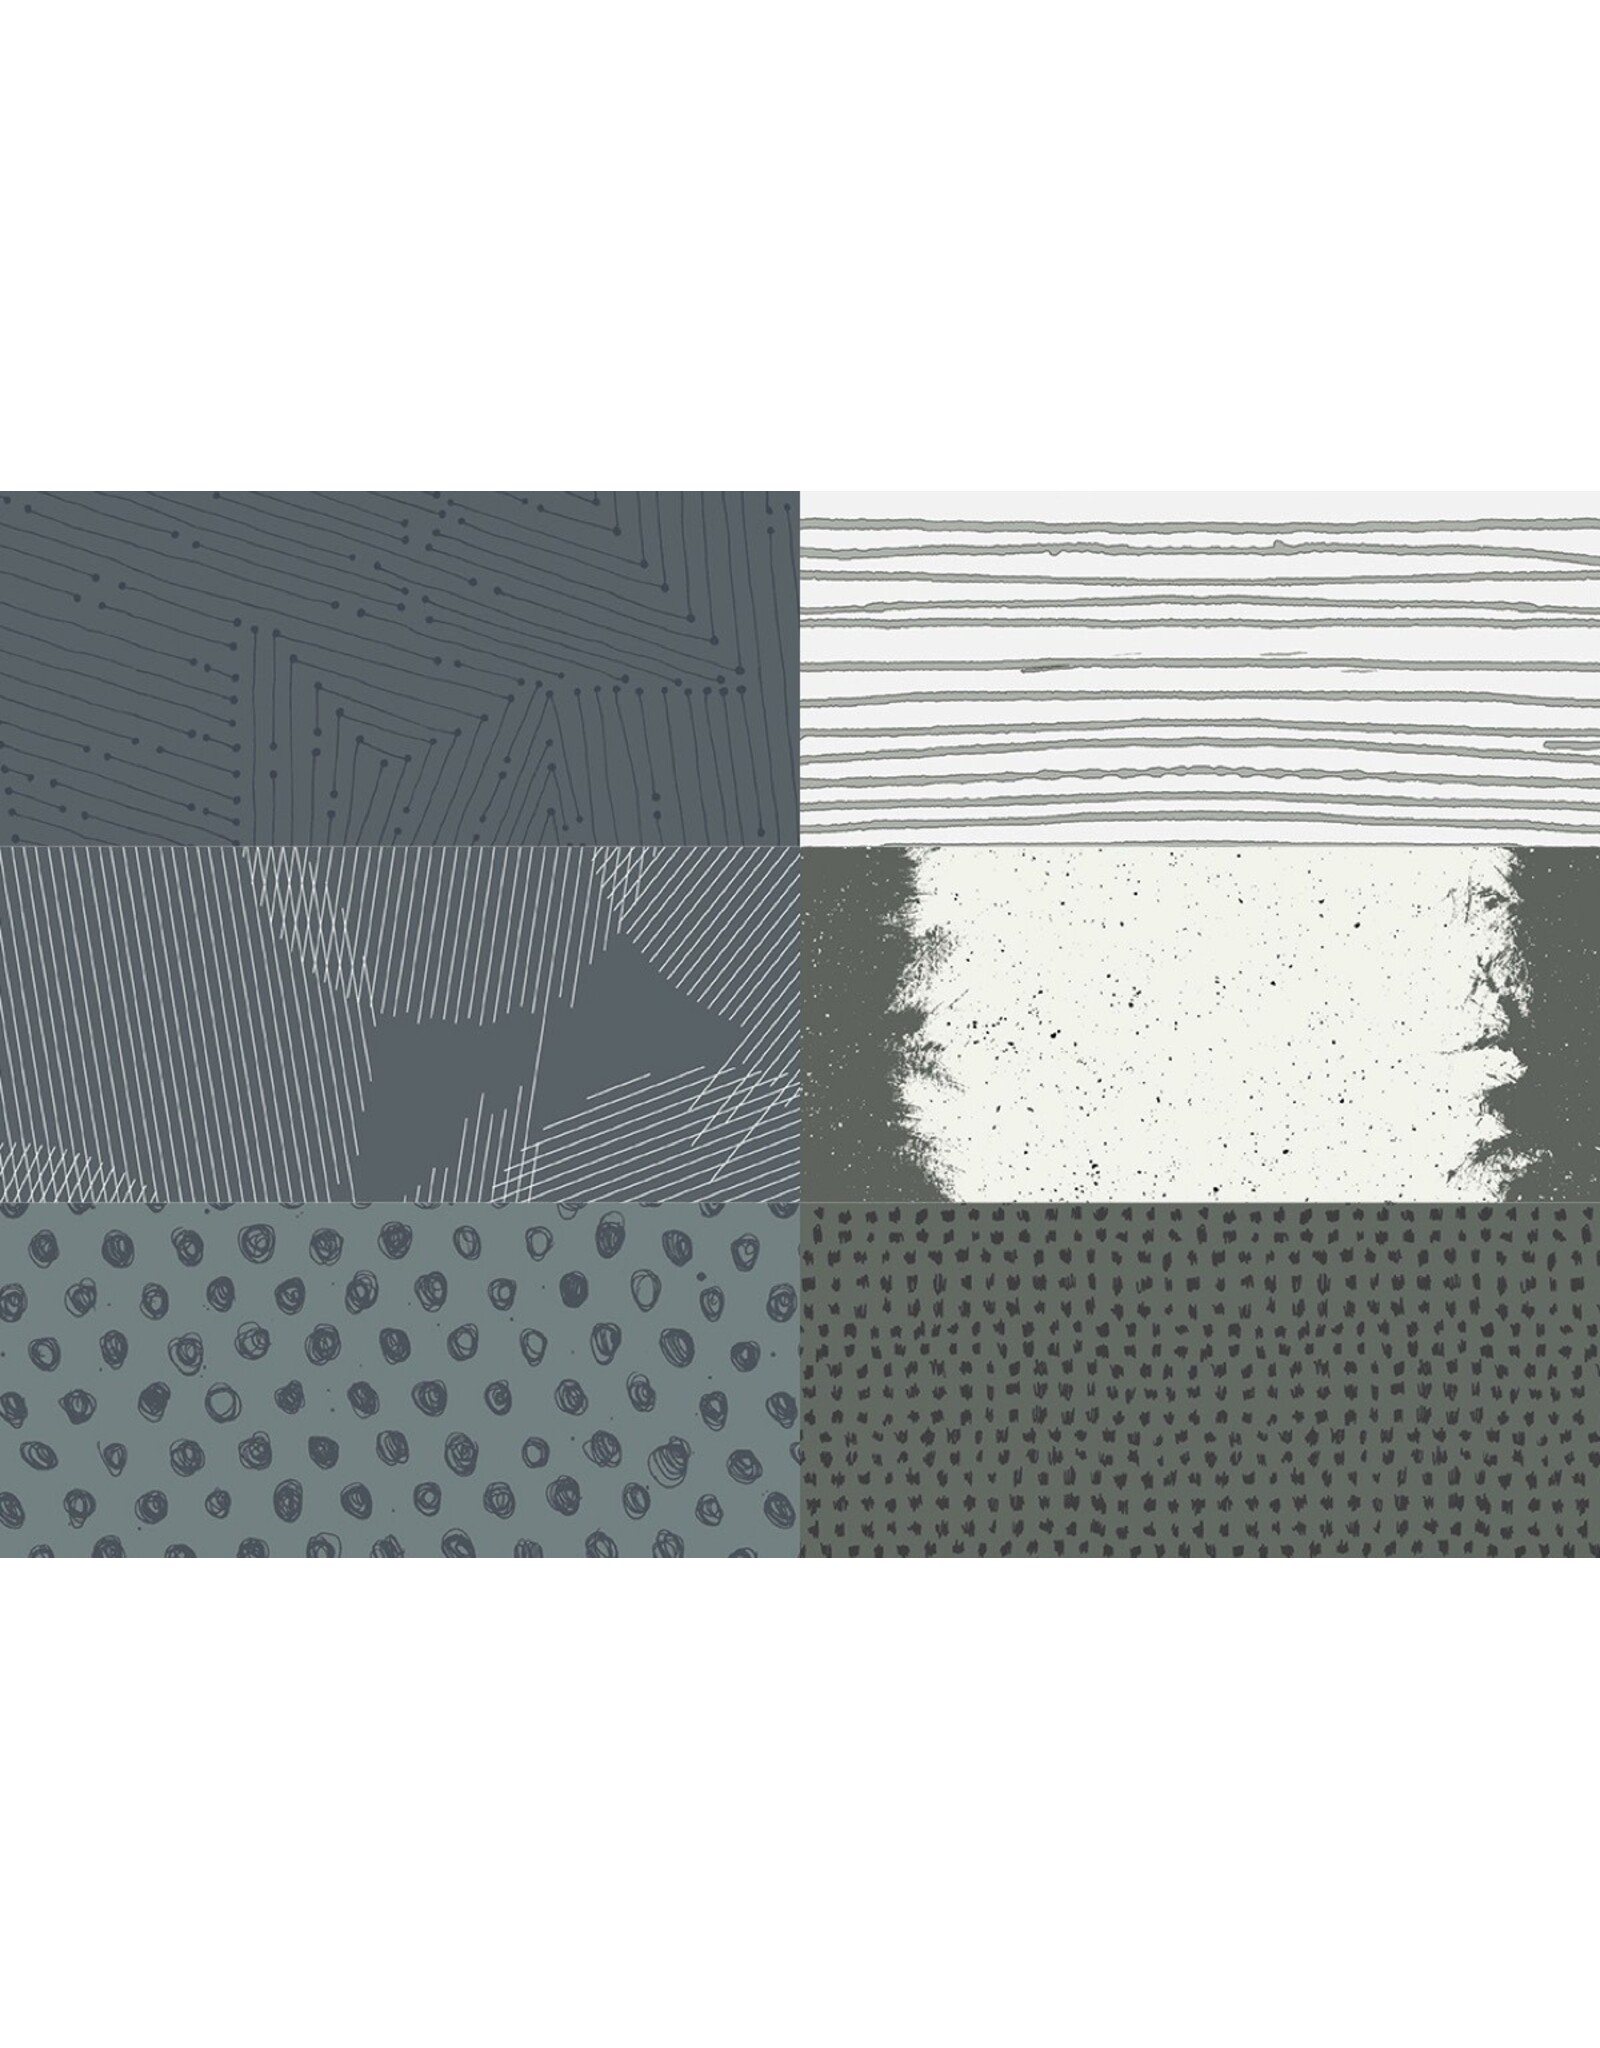 Andover Giucy Giuce - Ink - Fat Quarter Pakket - Warm Grey